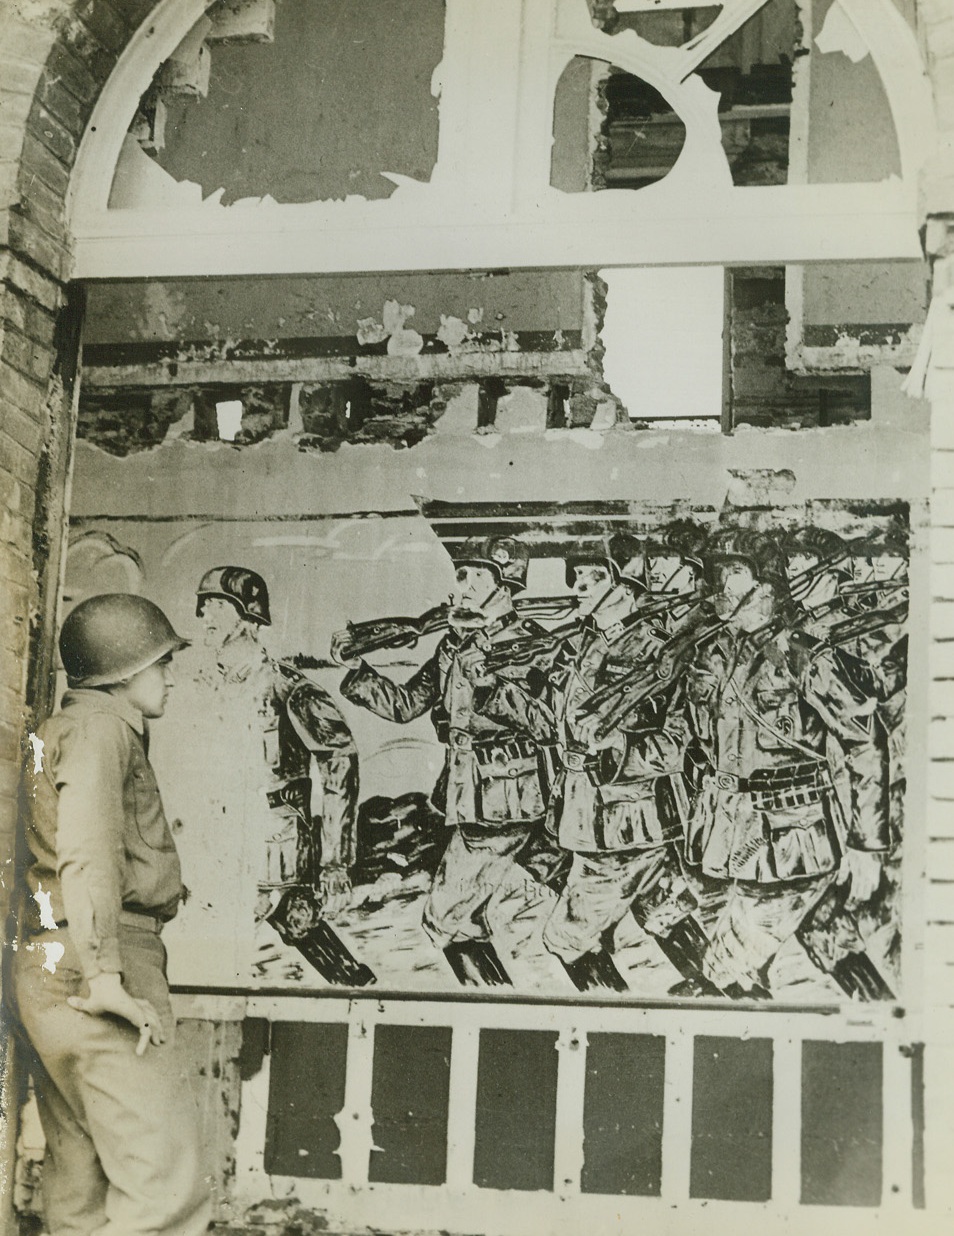 Nazi Victory Painting Premature, 8/4/1944. France – In a captured German headquarters in France an American soldier examines with interest an unfinished painting of German troops marching in victory. Nazis did not have time to complete it before evacuating before the relentless drive of the Allies. Shell fire has knocked holes in the mural. Credit: ACME;